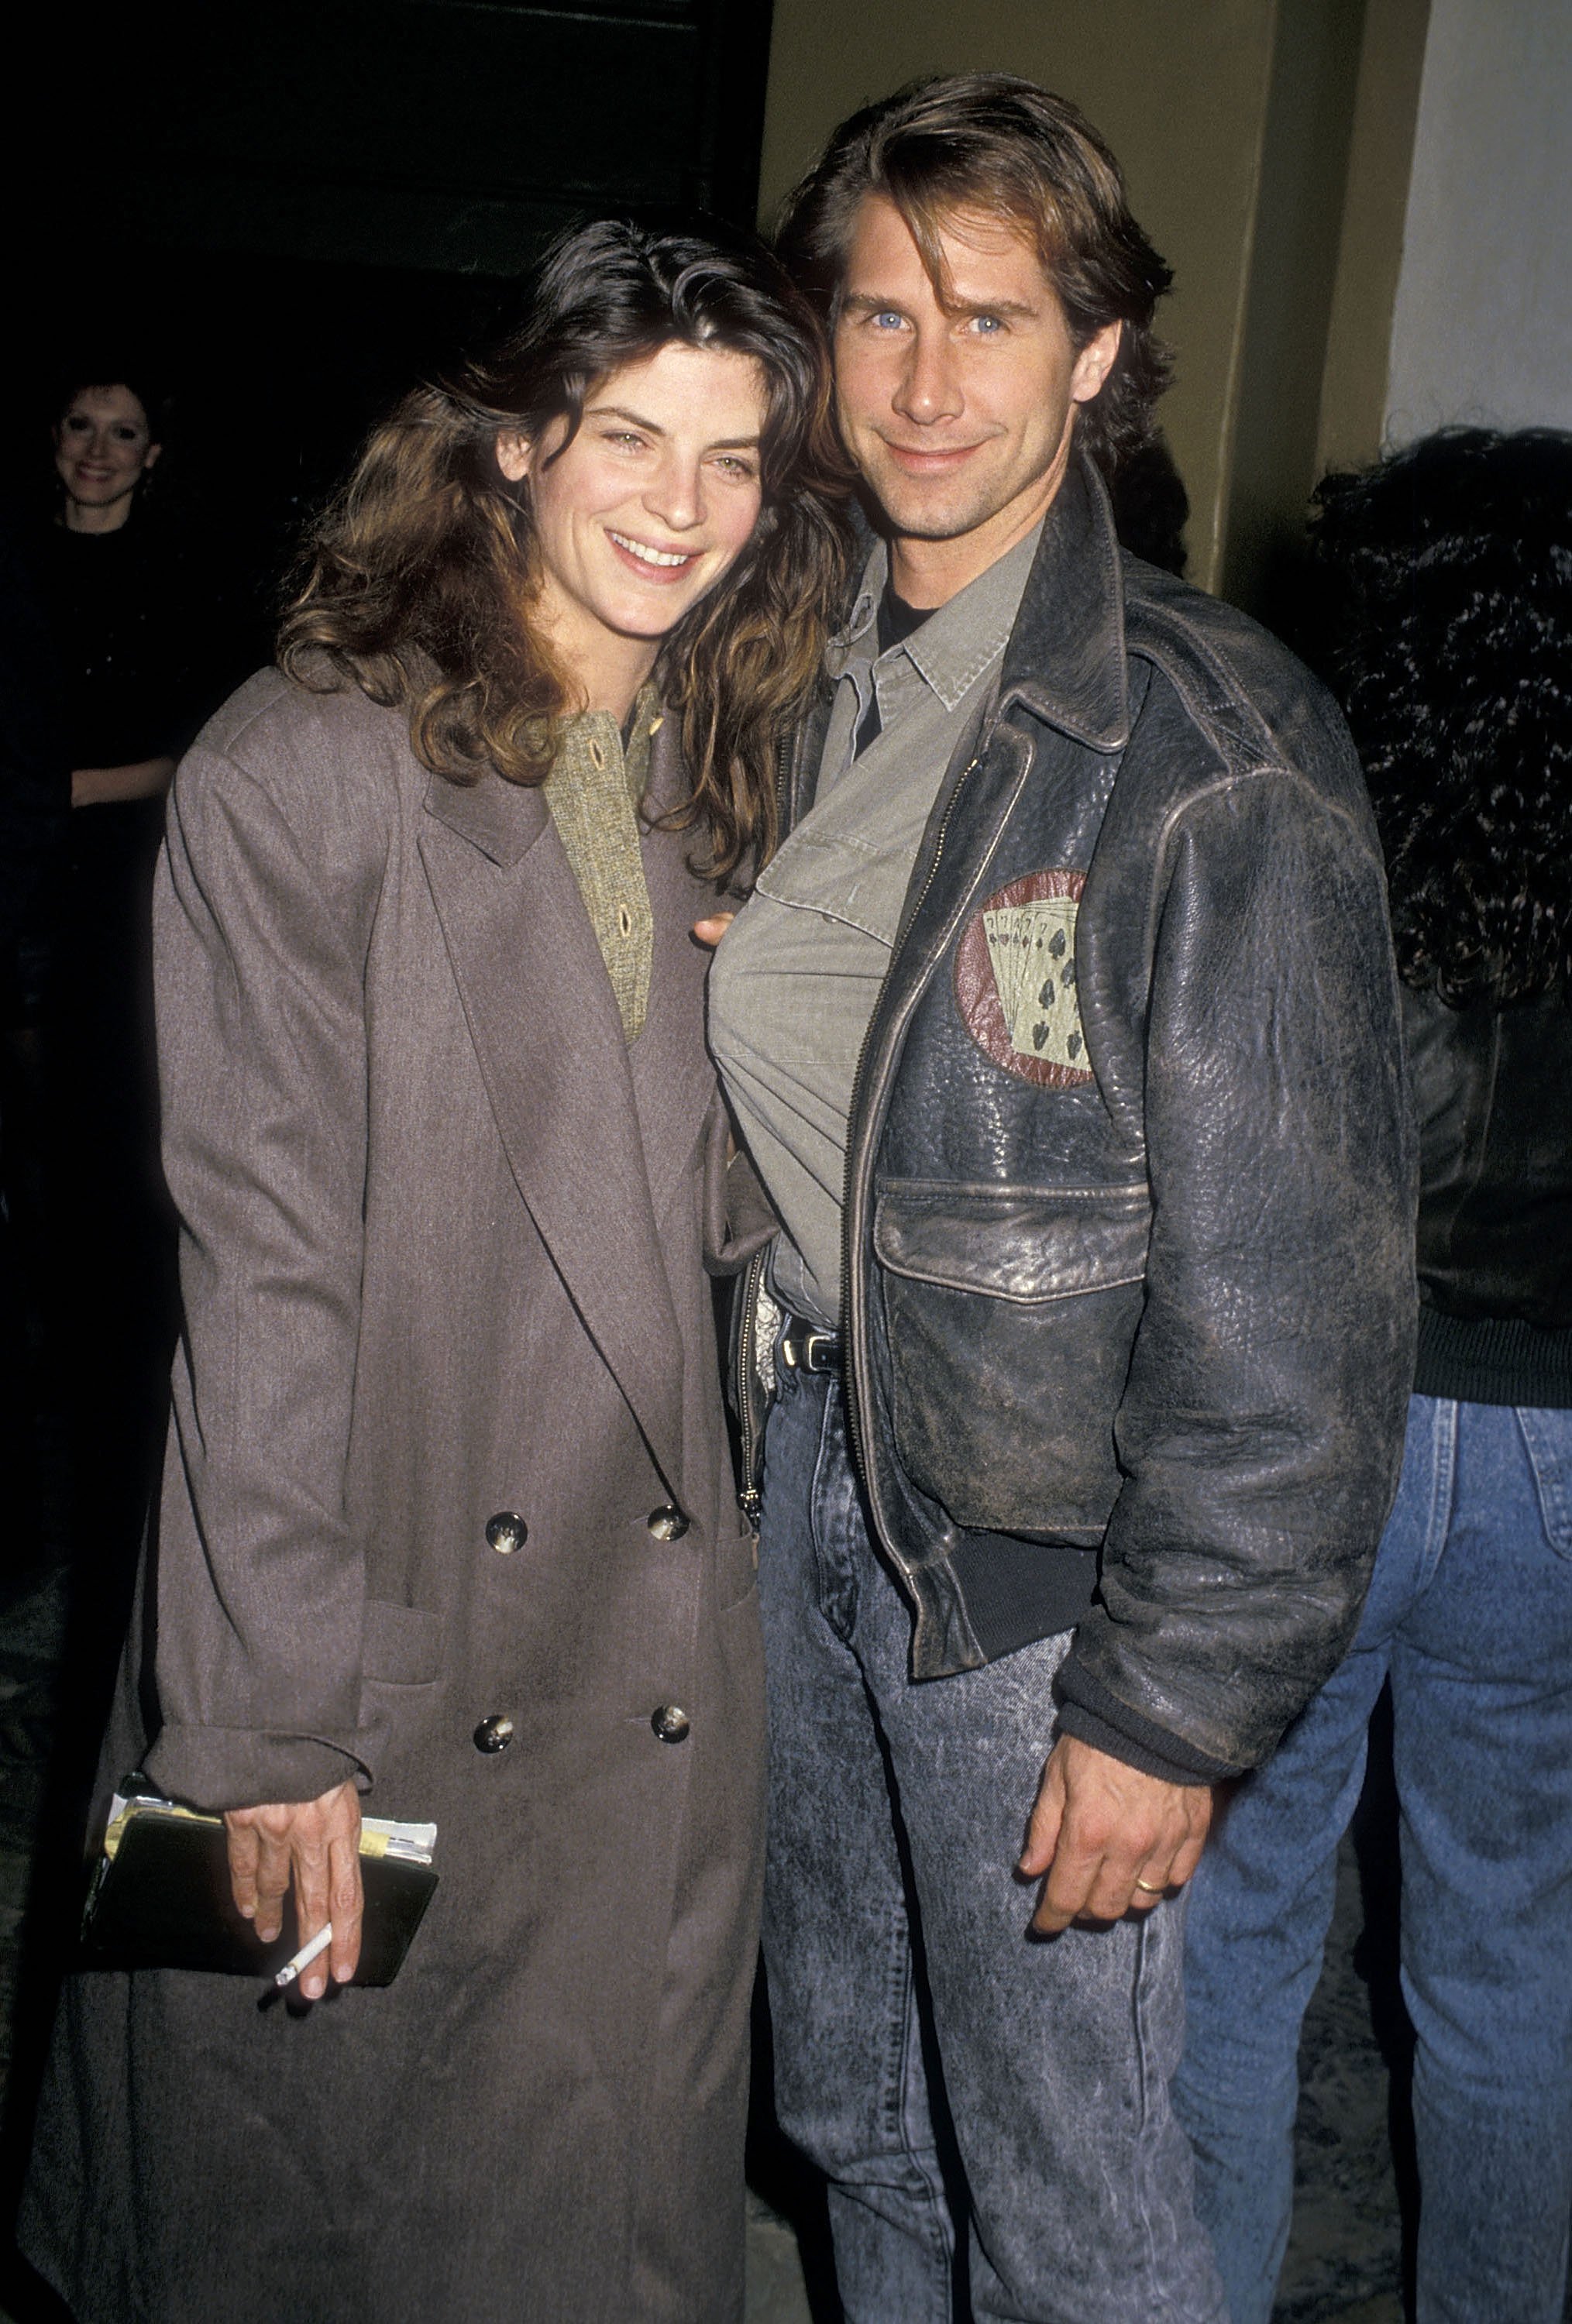 Actress Kirstie Alley and actor Parker Stevenson at the "Shoot to Kill" Westwood Premiere on February 4, 1988 at the Mann Westwood Theatre in Westwood, California. | Source: Getty Images